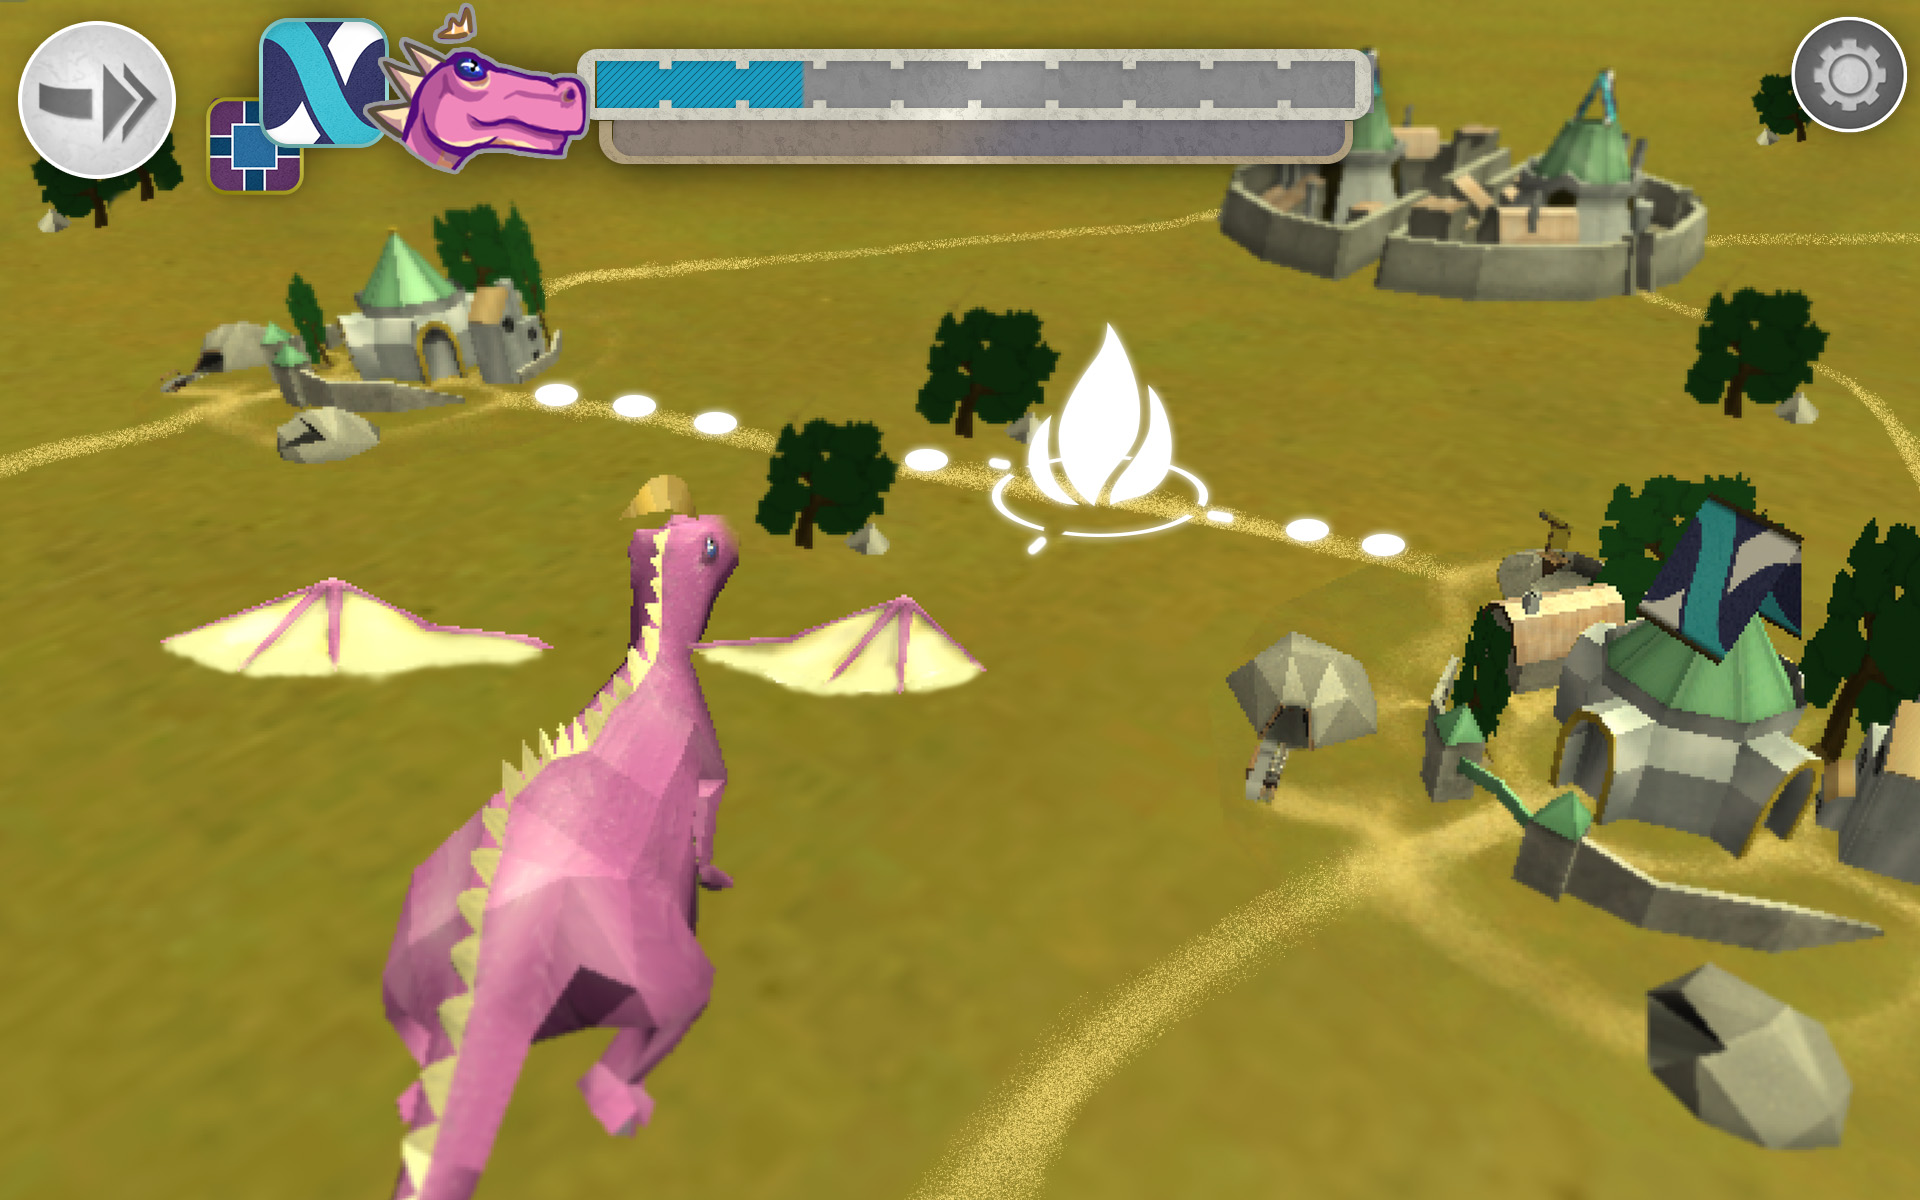 3D view of a pink dragon in flight, bearing down on a road between two stone settlements where a flame symbol has appeared.